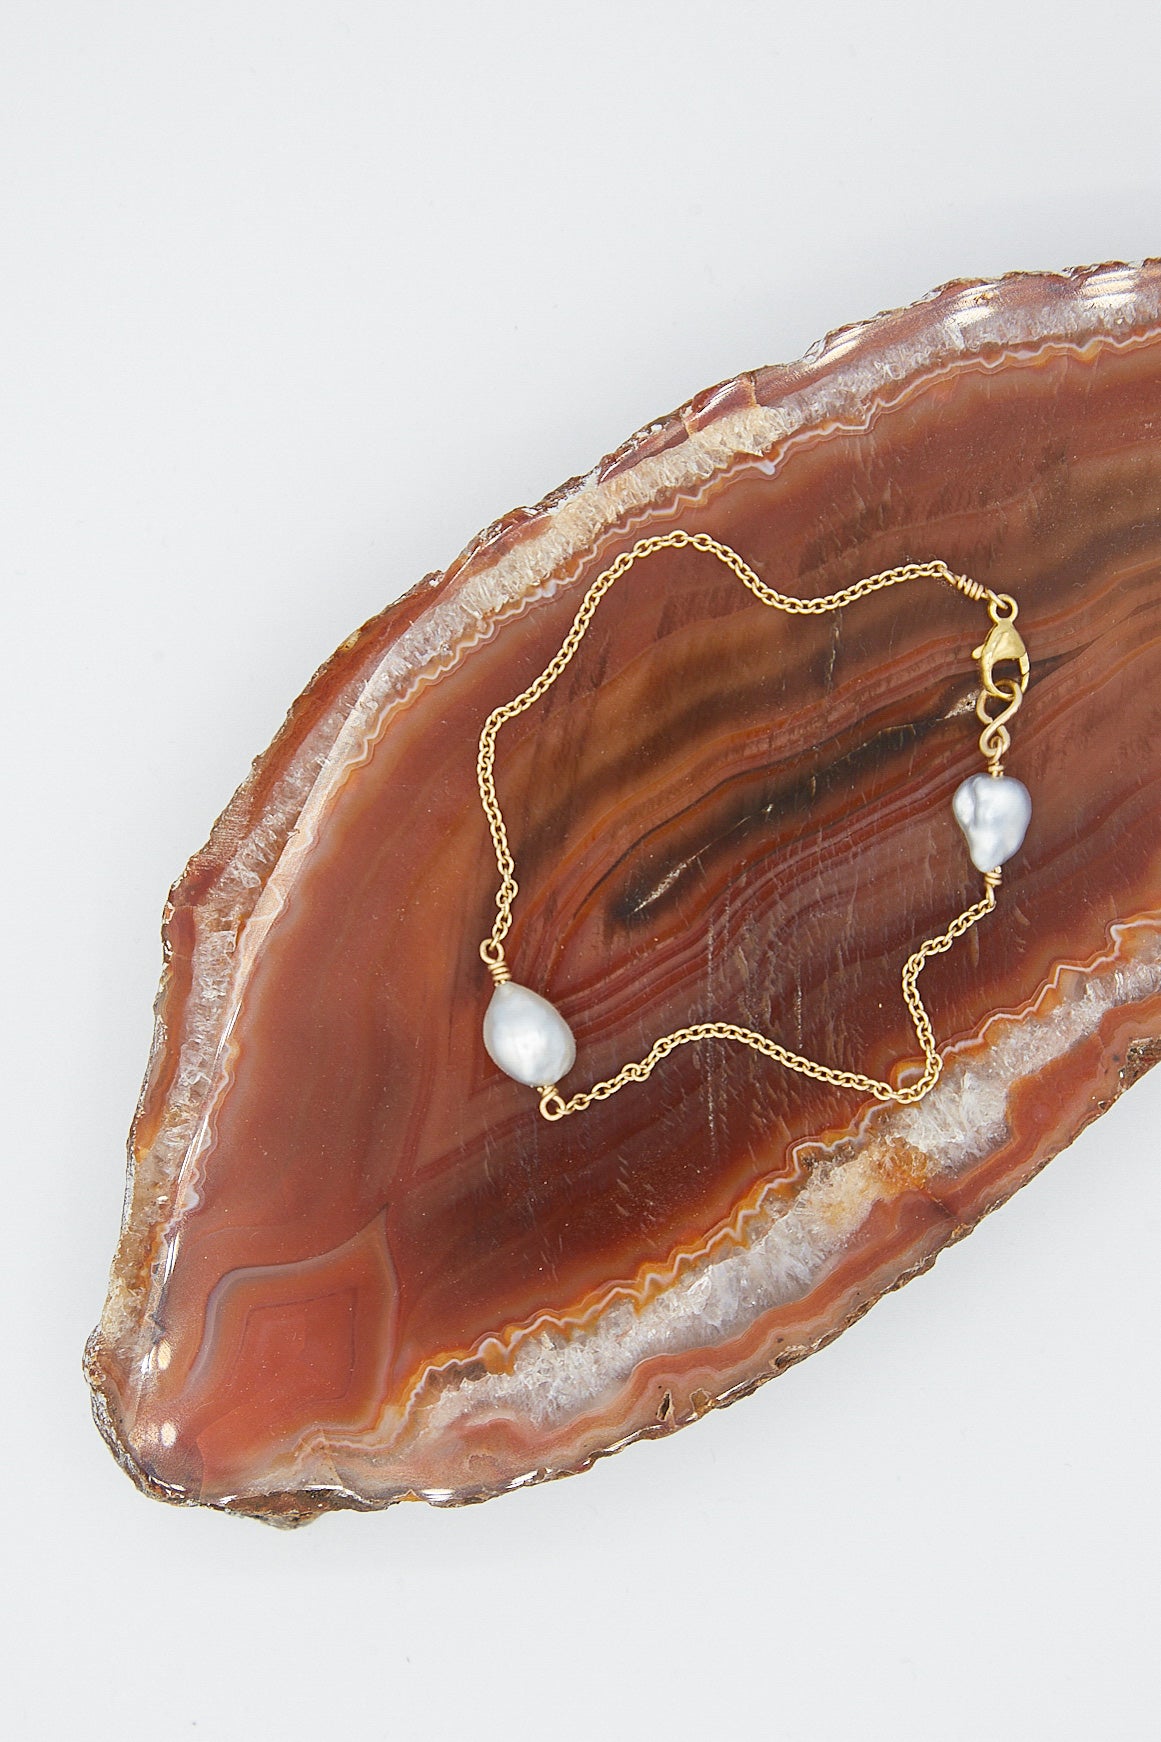 A Mary MacGill 14K Chain Bracelet in Keshi Pearl adorned with an agate.